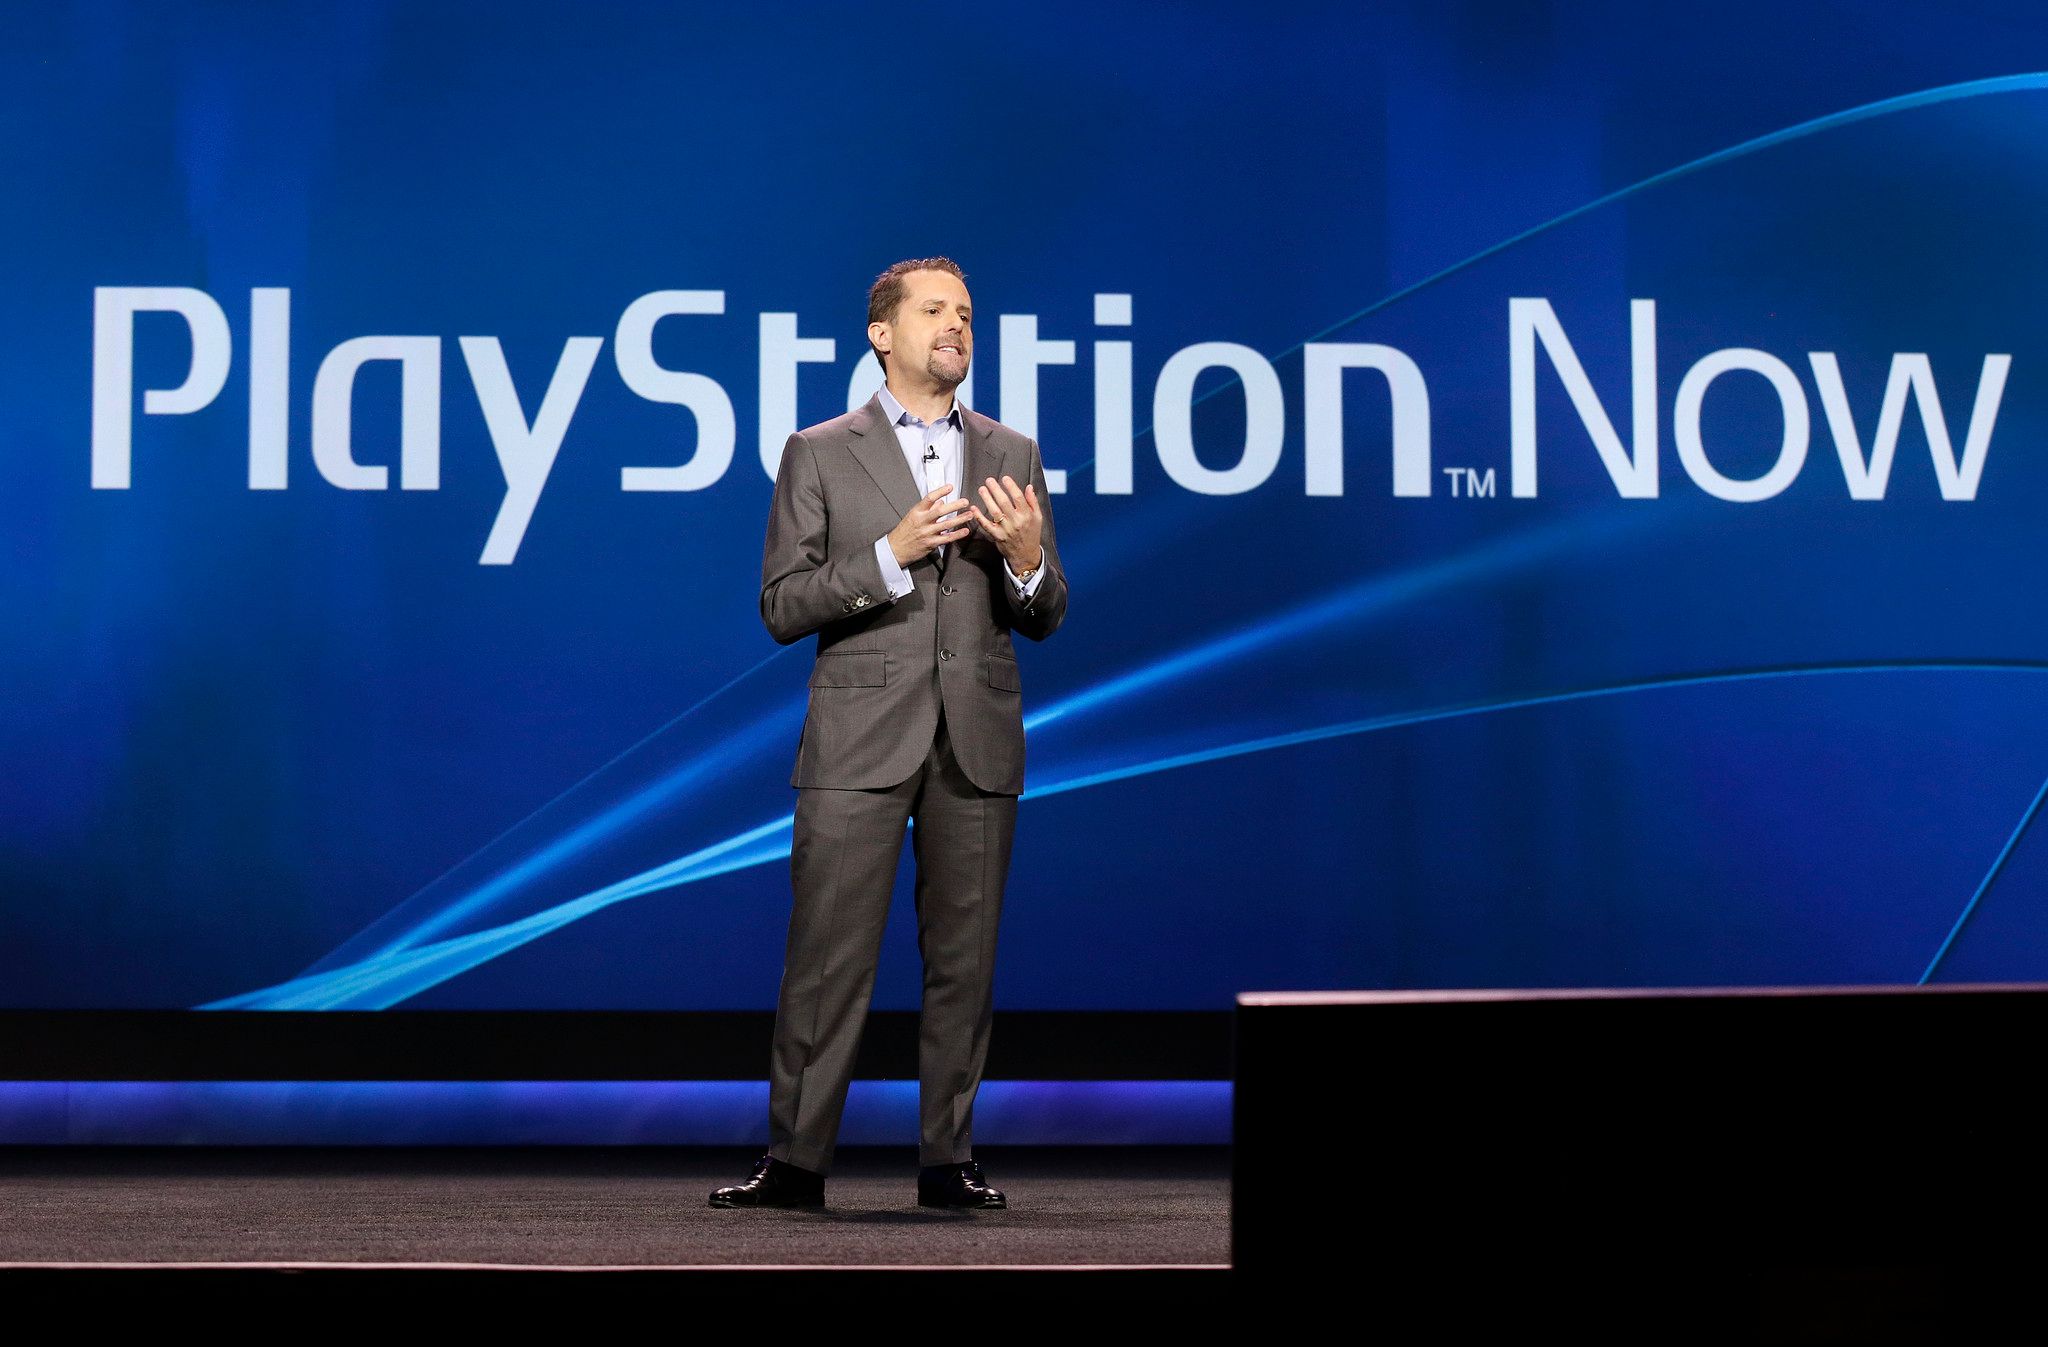 Sony PlayStation Now launches open beta version